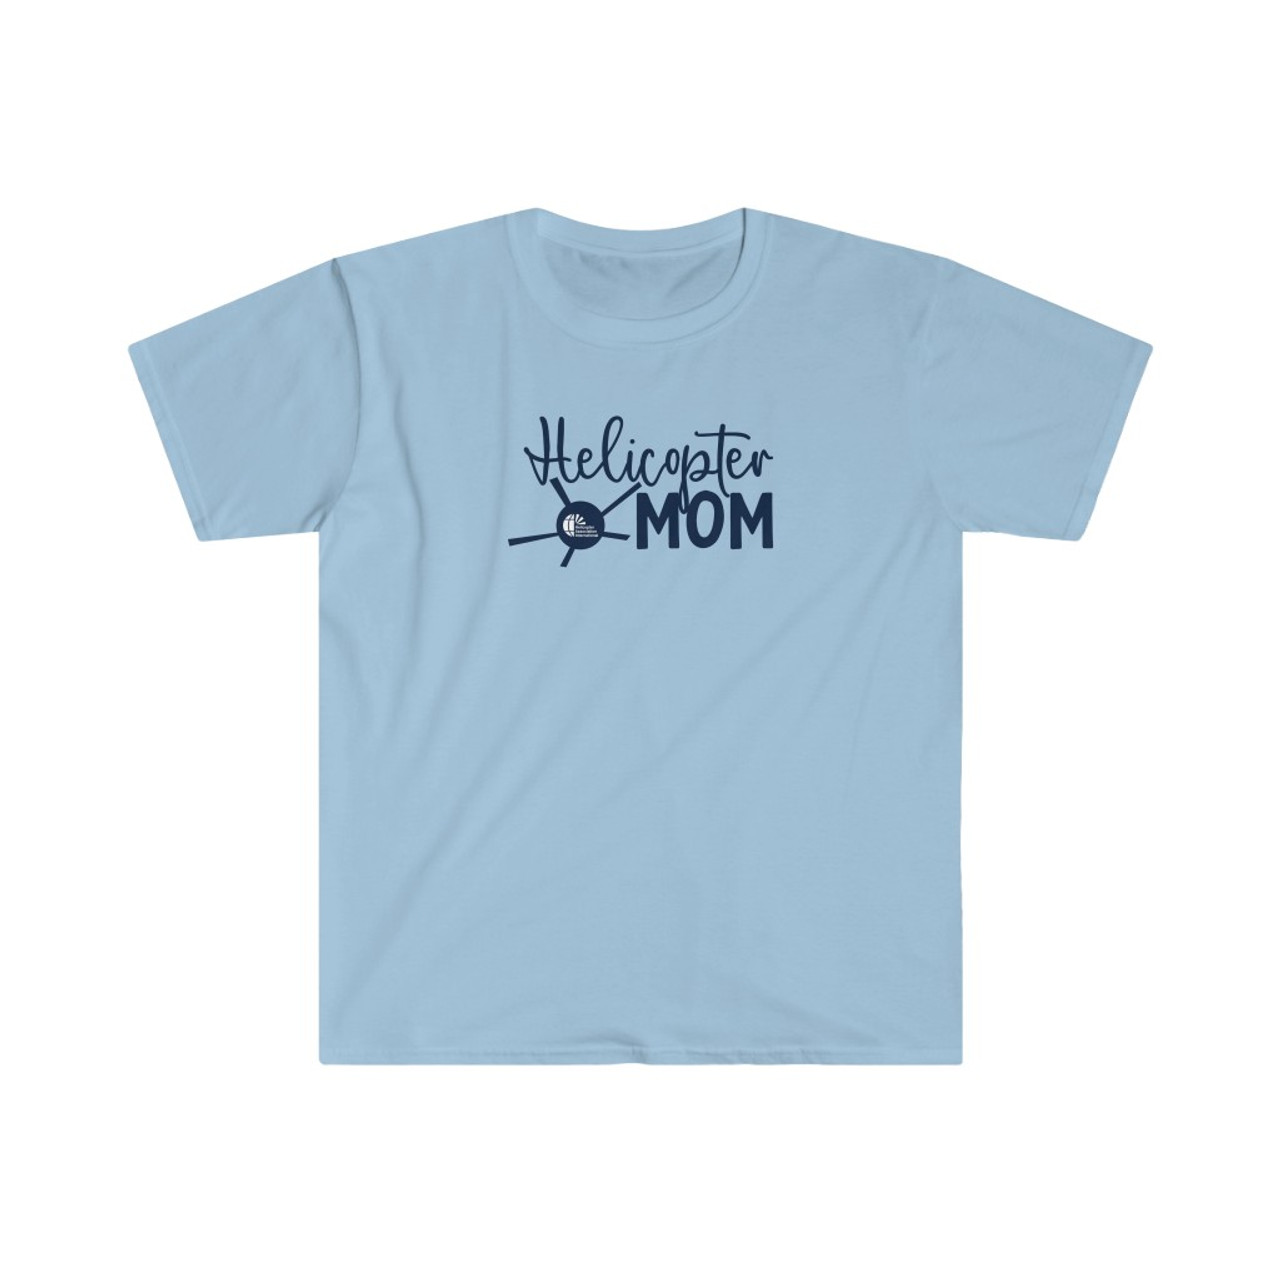 Unisex Light Blue "Helicopter Mom" Softstyle T-Shirt